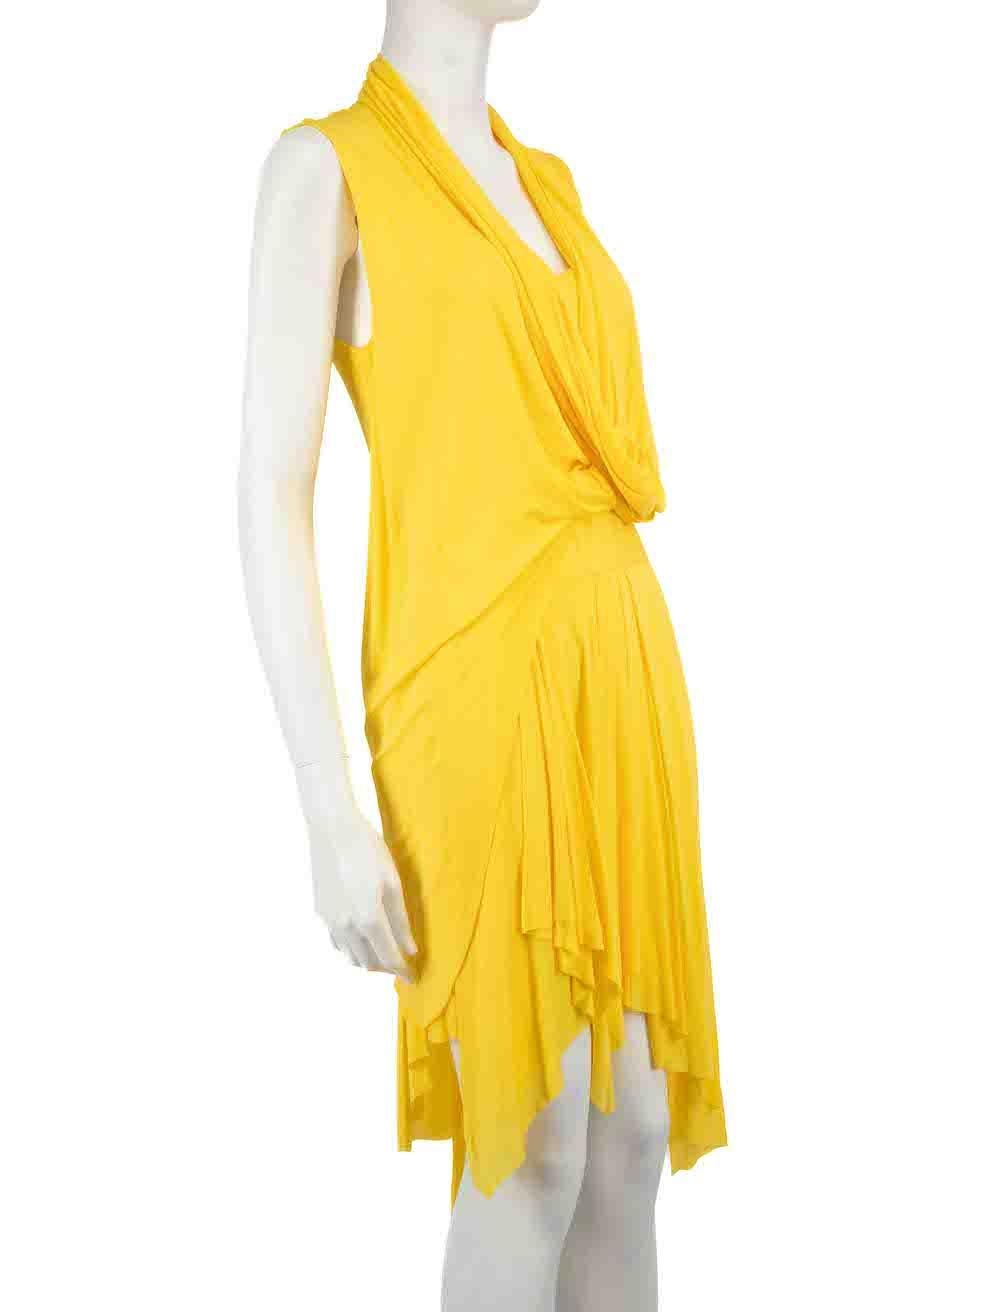 CONDITION is Very good. Hardly any visible wear to dress is evident on this used Balmain designer resale item.
 
 Details
 Yellow
 Viscose
 Mini dress
 Drape accent
 Scoop neckline
 Stretchy
 Side zip closure
 
 
 Made in France
 
 Composition
 100%